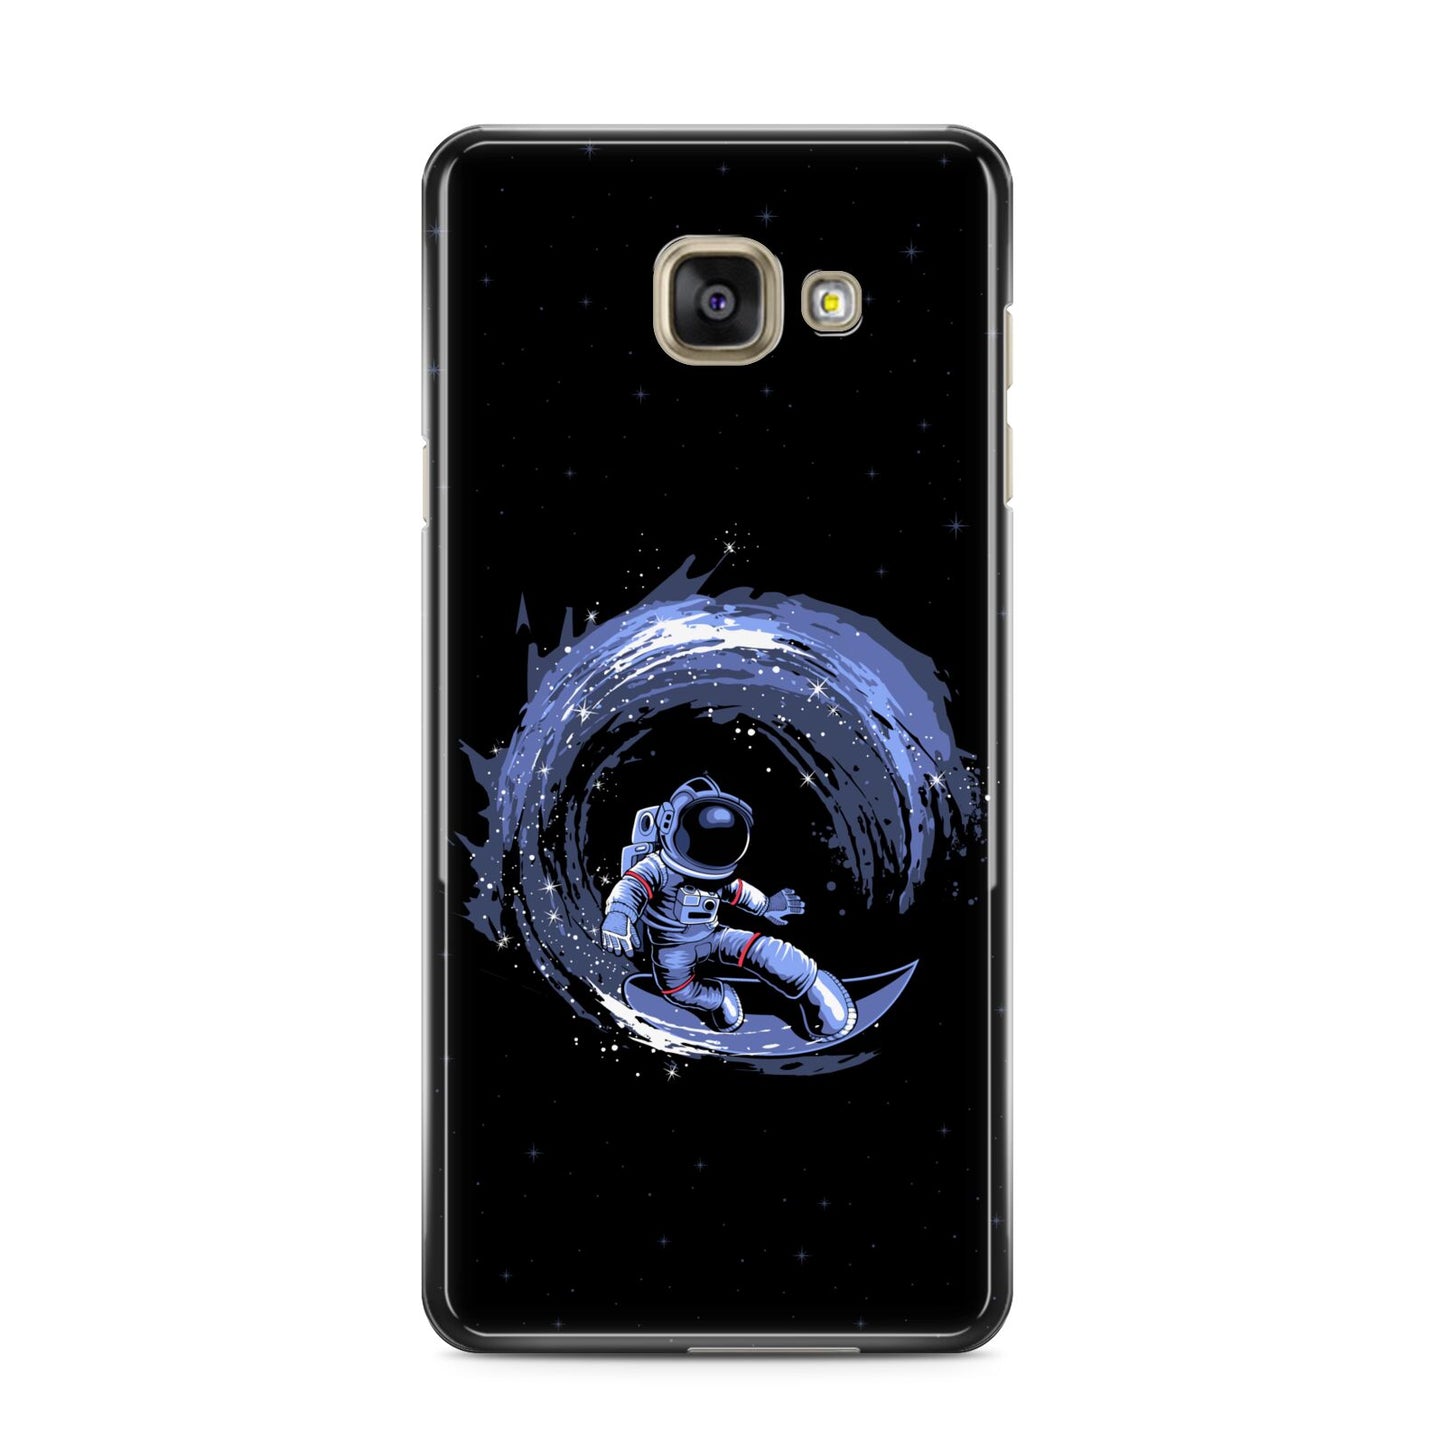 Surfing Astronaut Samsung Galaxy A3 2016 Case on gold phone